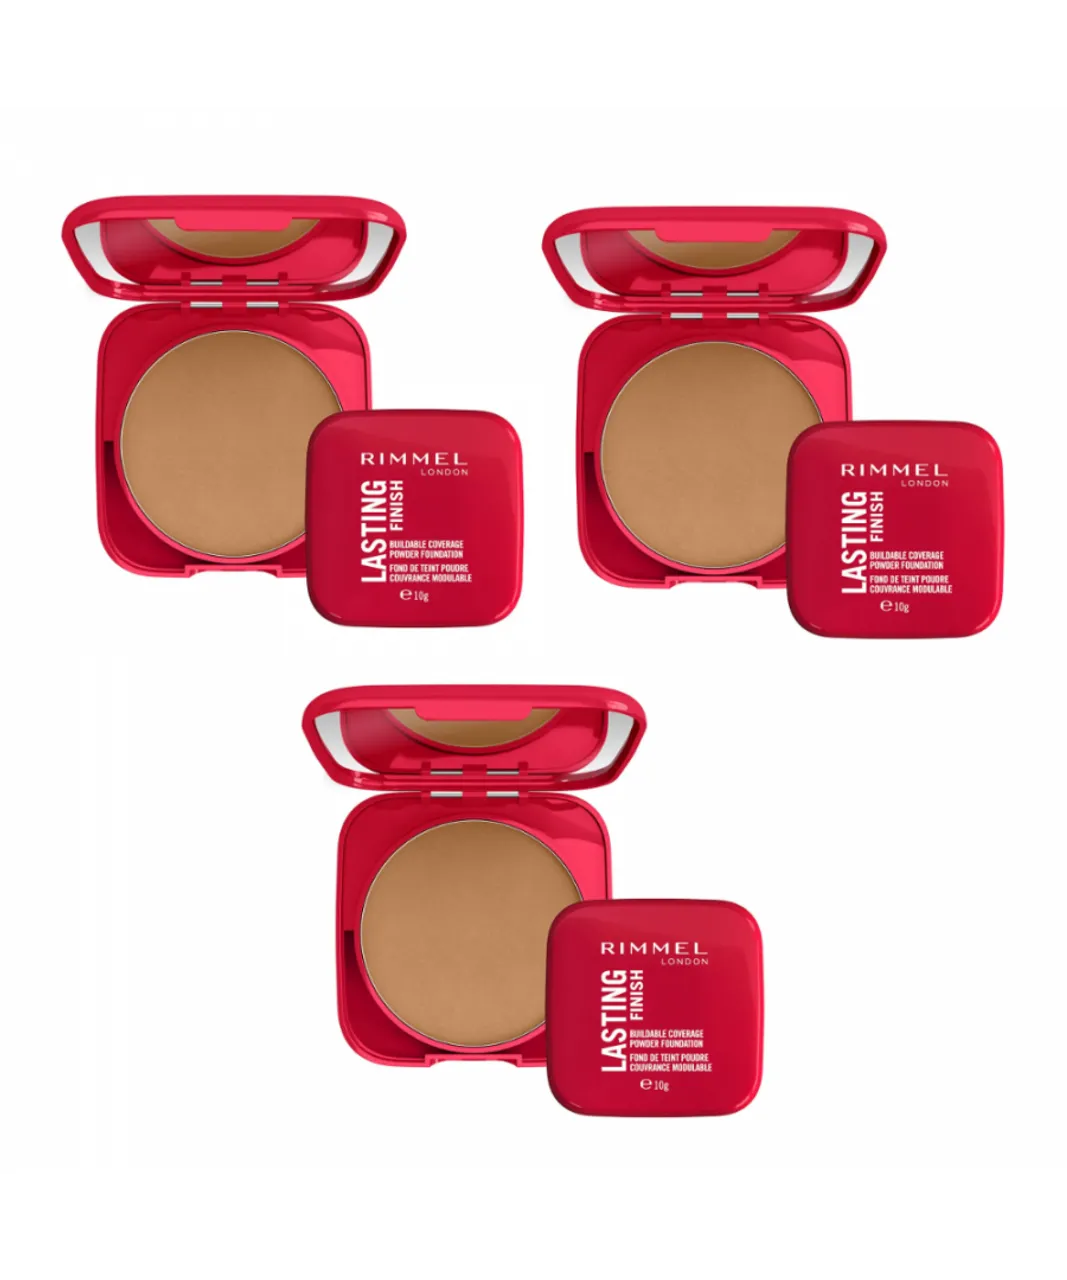 Rimmel London Womens 3 x Lasting Finish Buildable Coverage Powder Foundation 10g - 008 Soft Beige - One Size